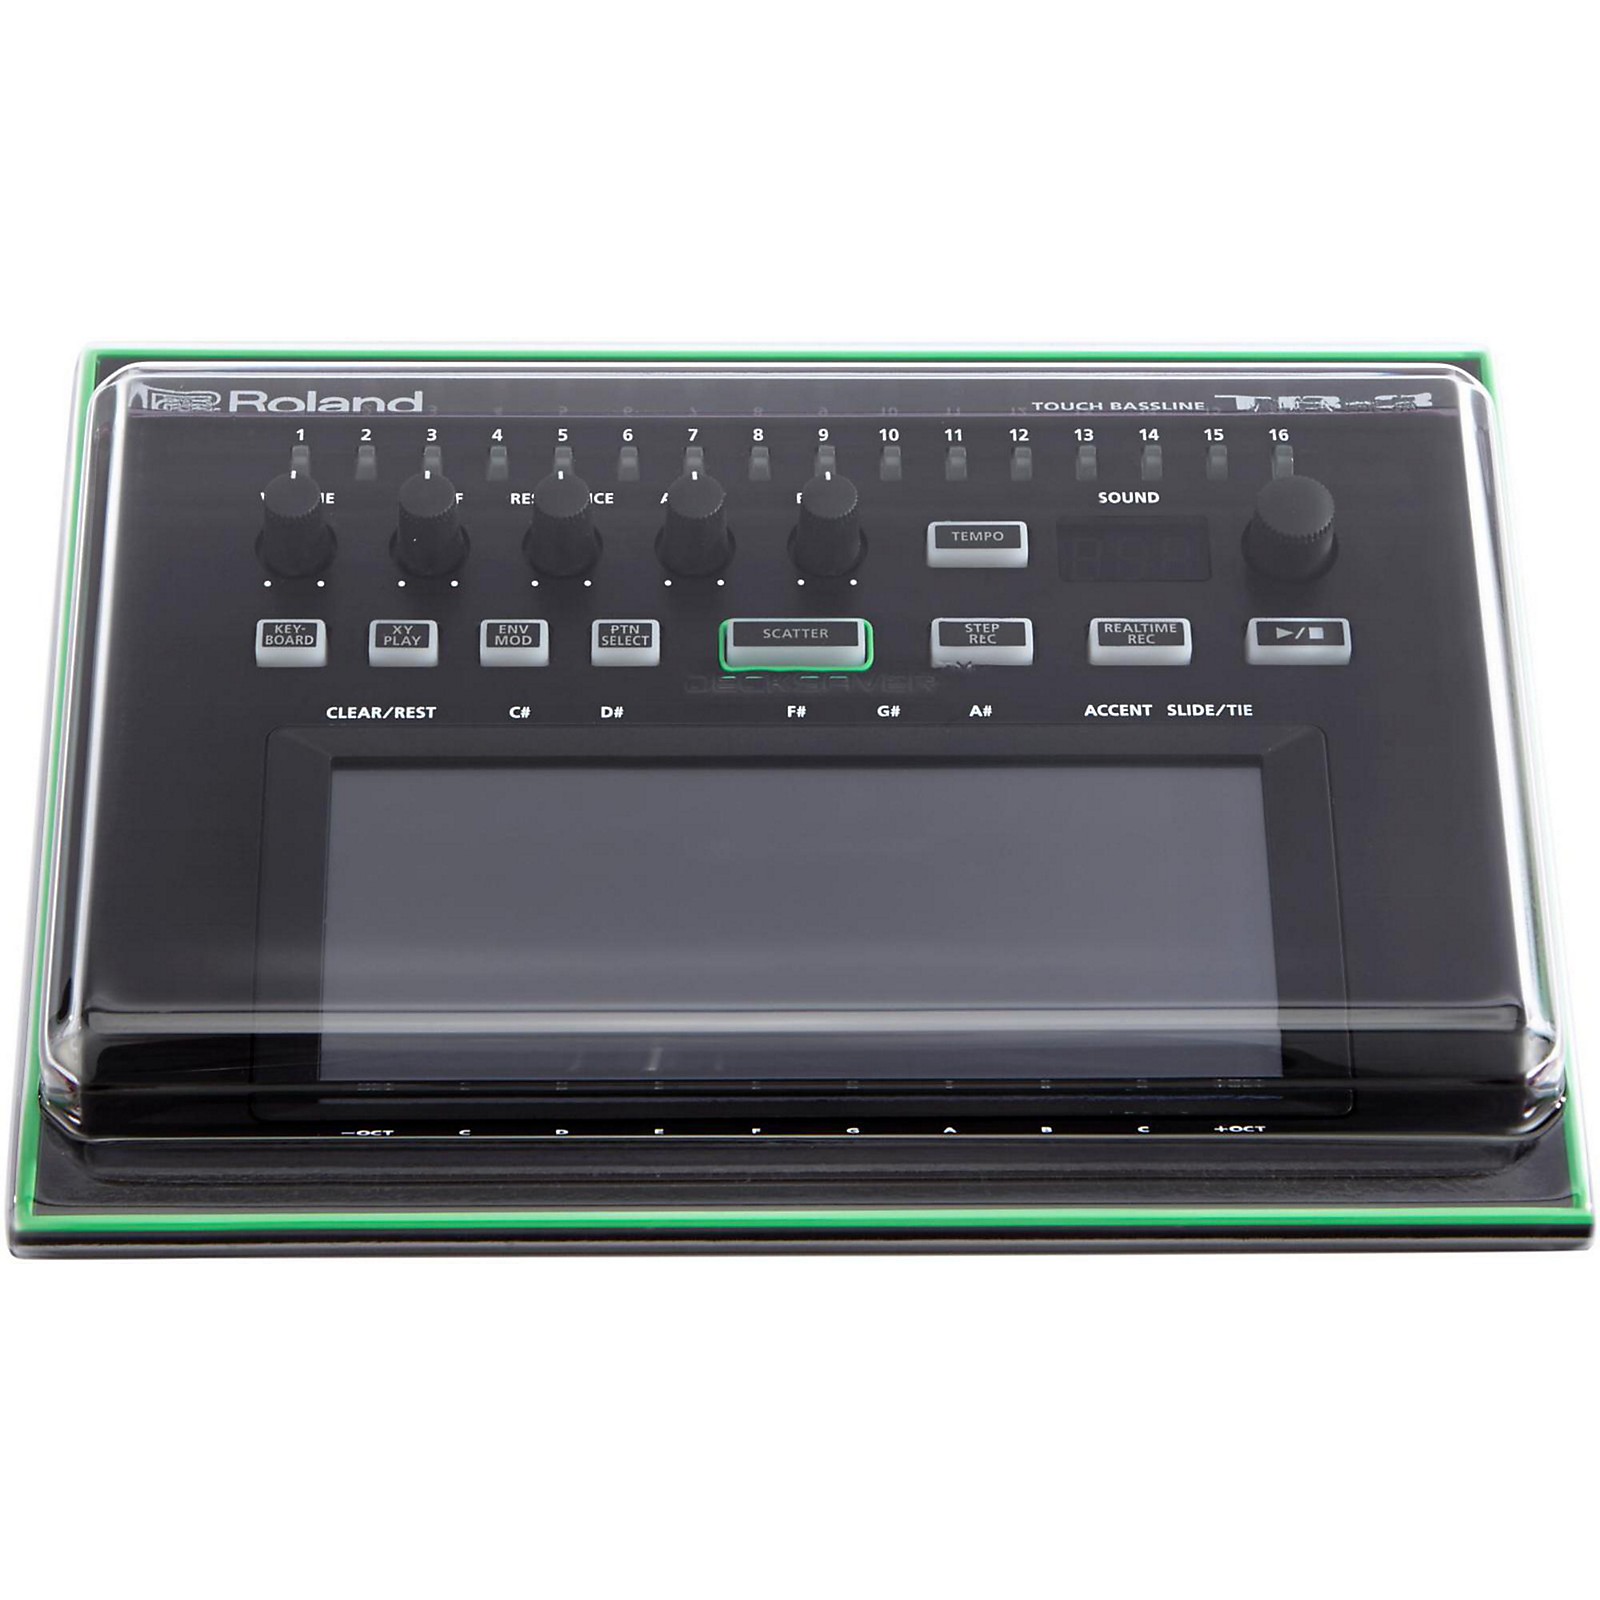 Roland aira tb-3 software controller for mac